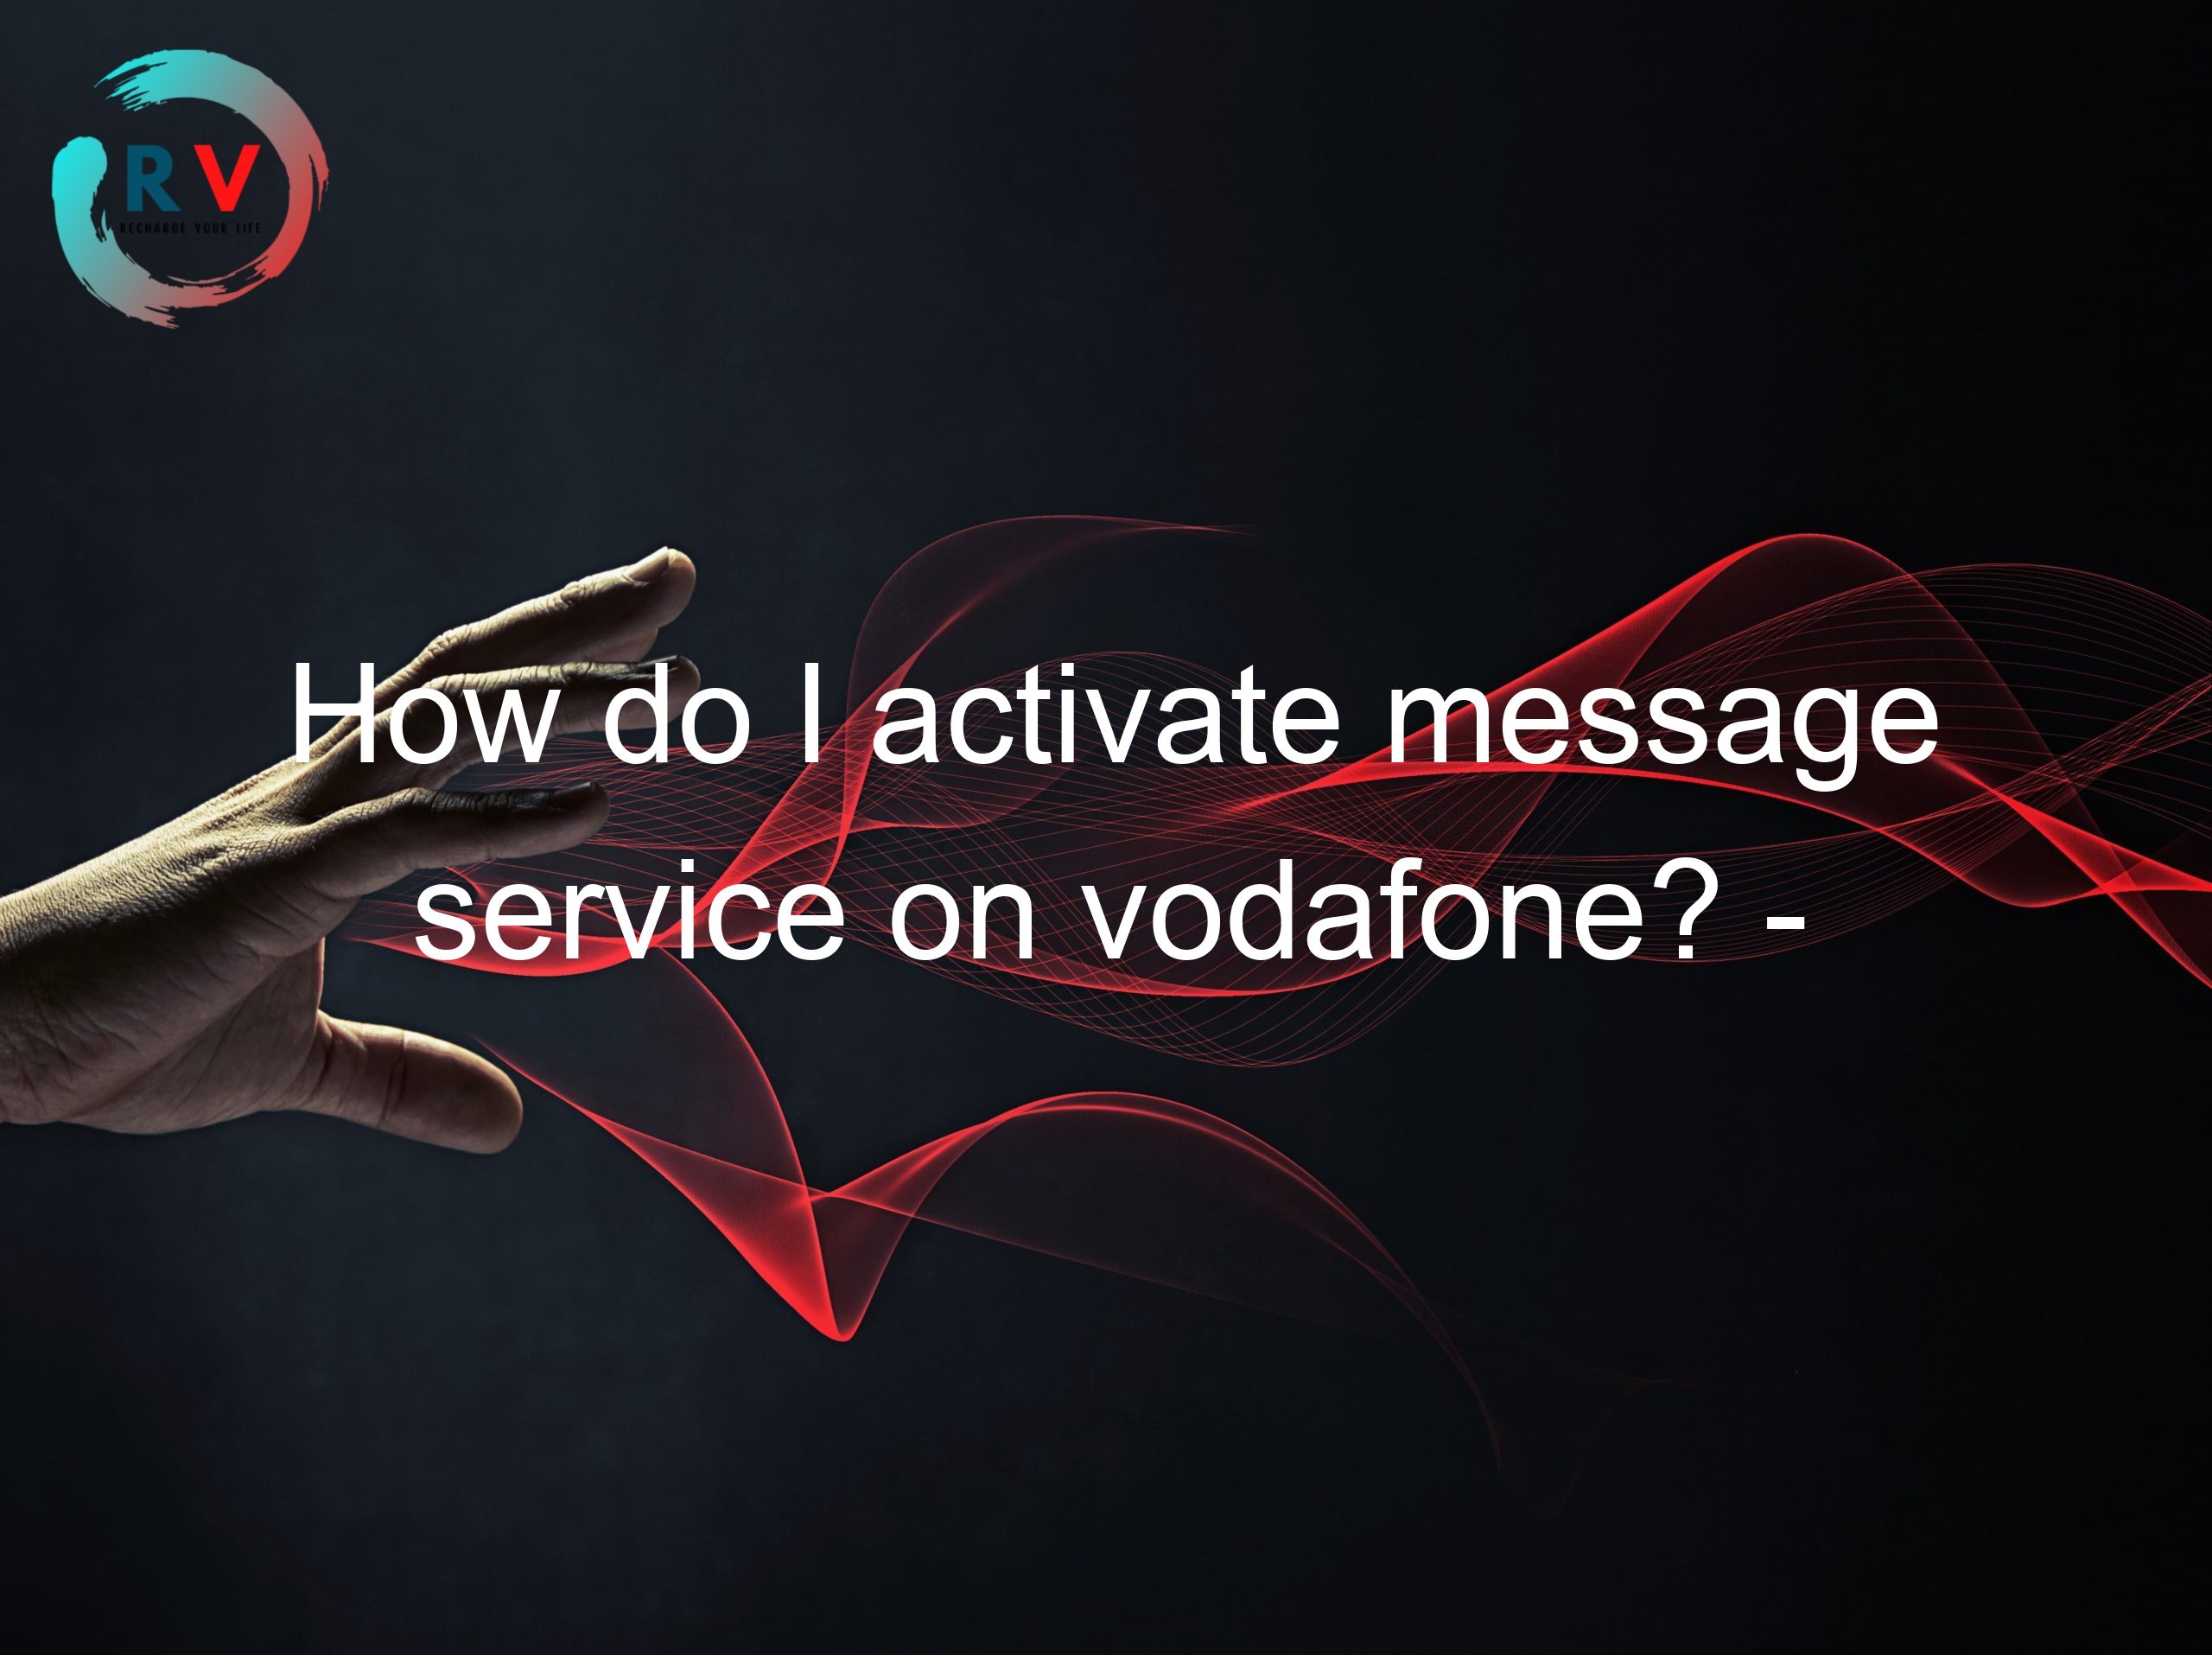 How do I activate message service on vodafone? - Find out in this article!